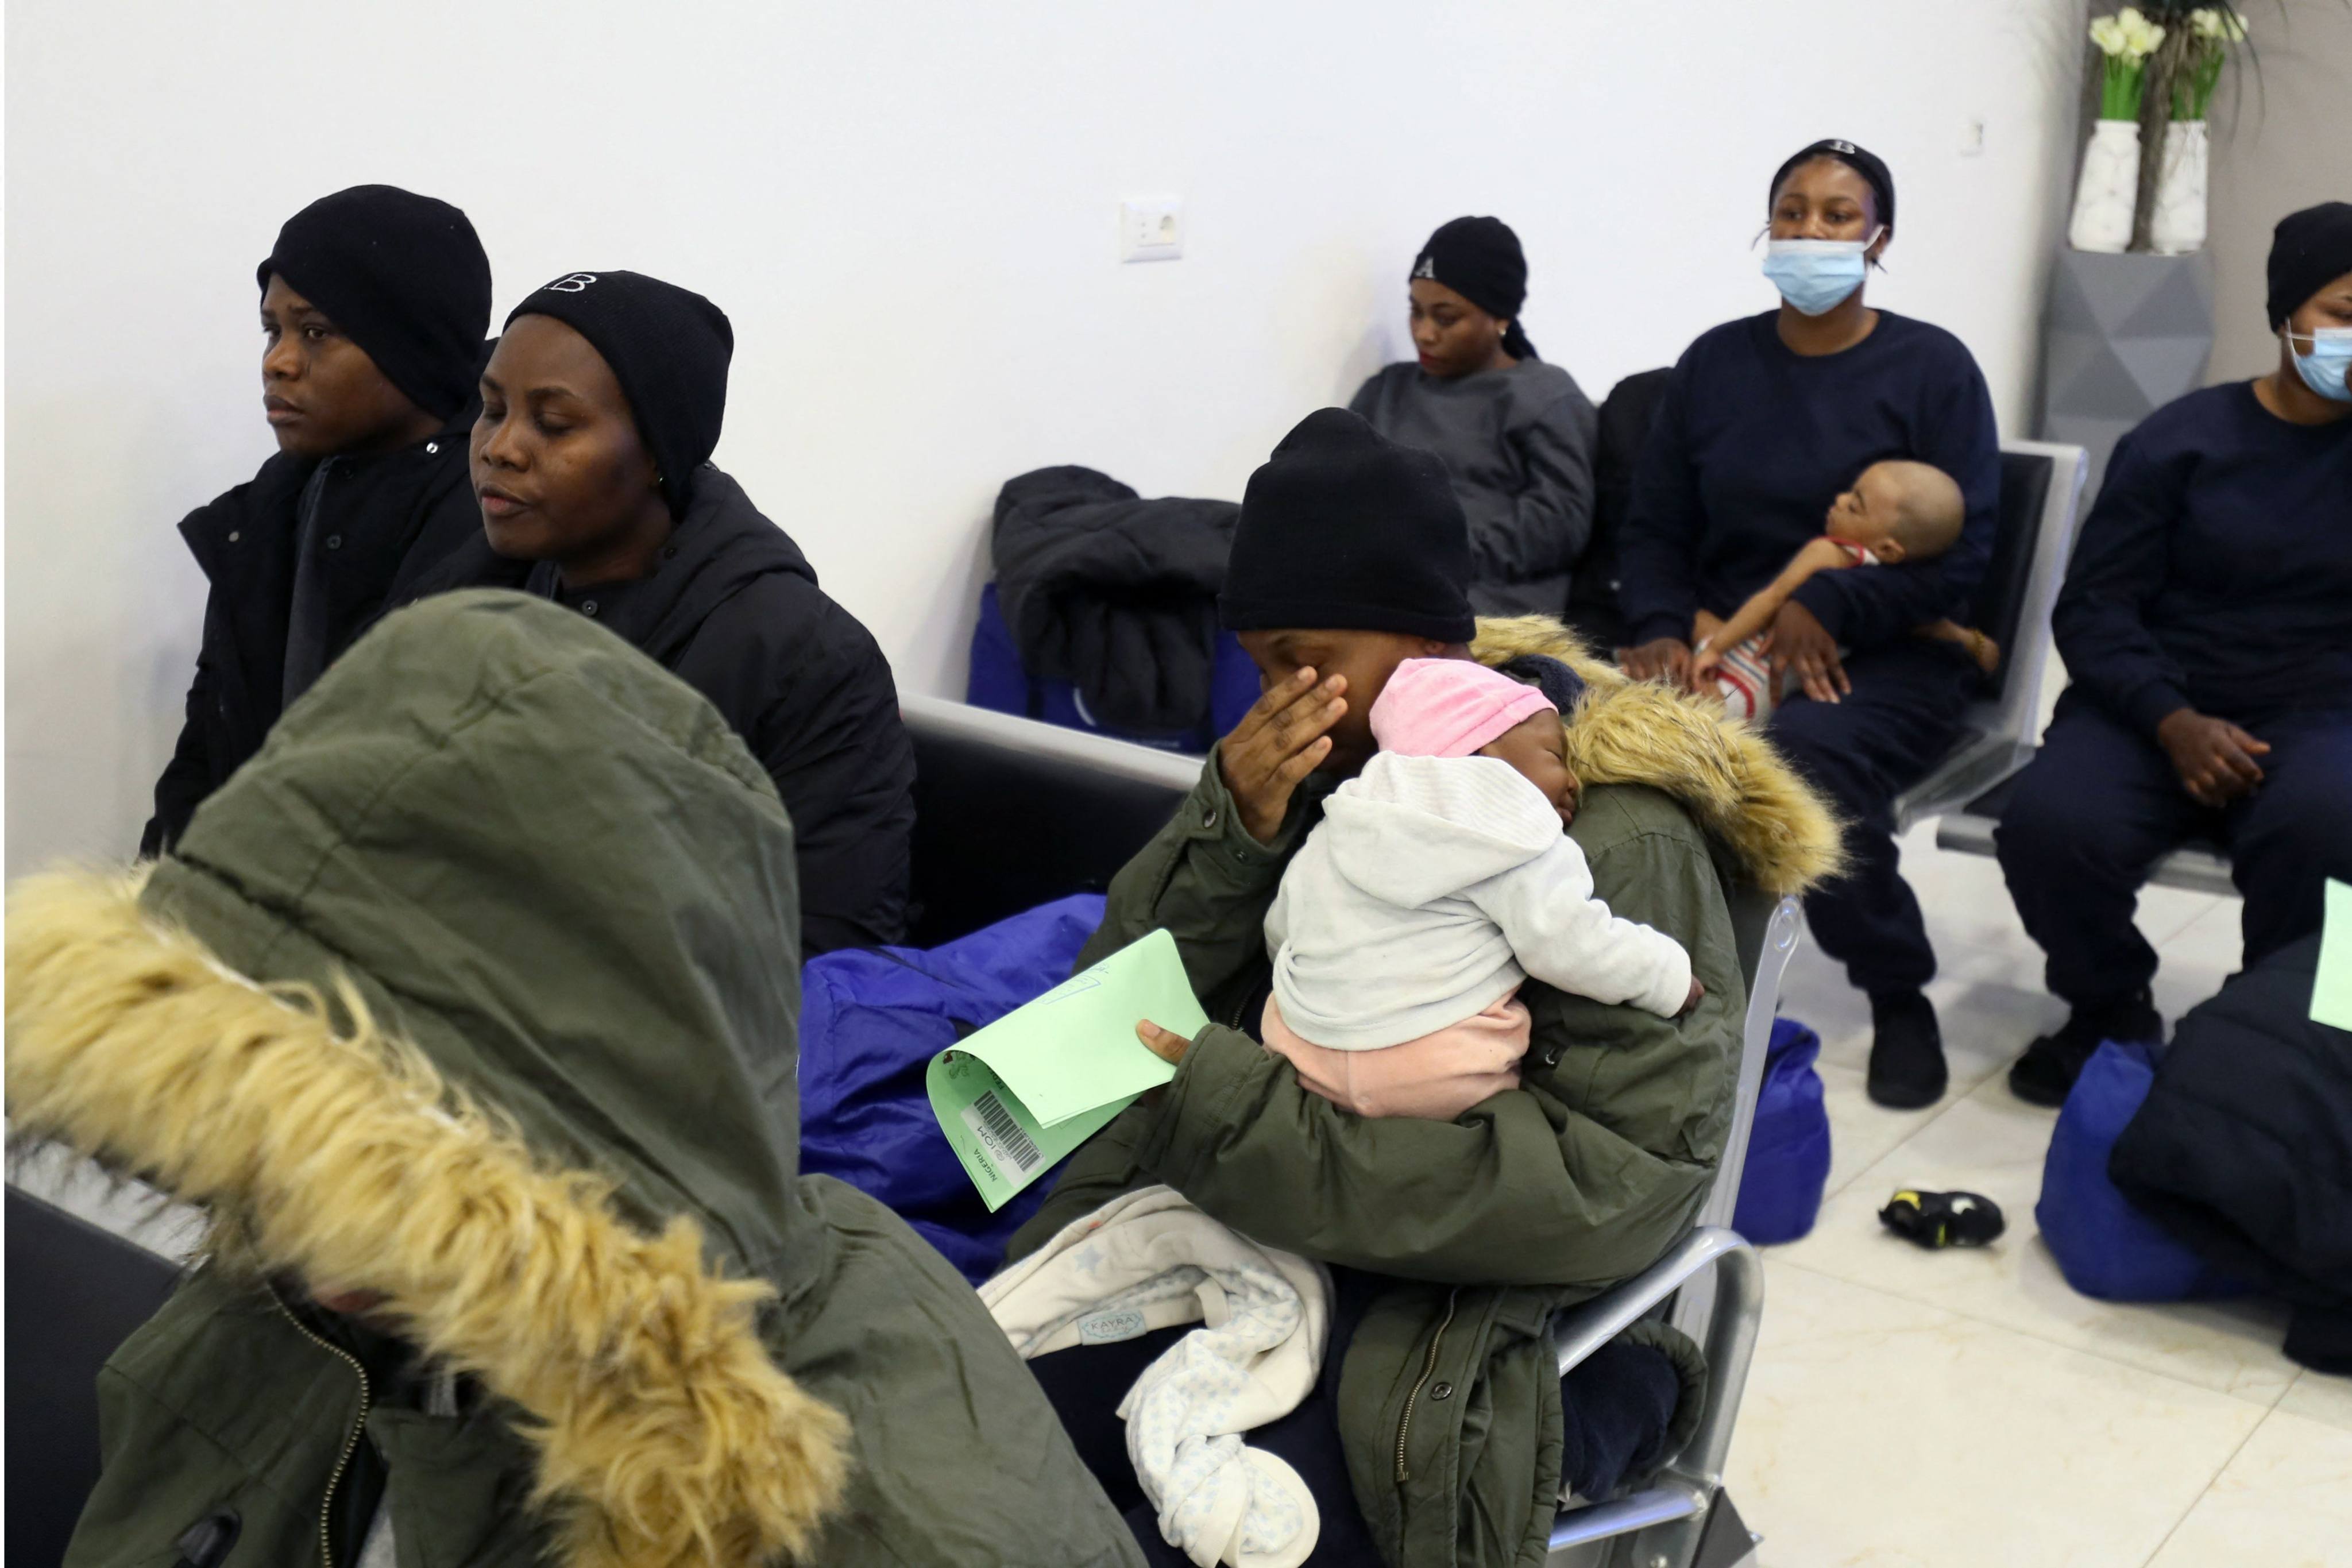 Irregular Nigerian migrants are given documents prior to their June departure from Libya’s anti-migration bureau, which is tasked with coordinating deportations of foreigners in the country illegally. Photo: AFP